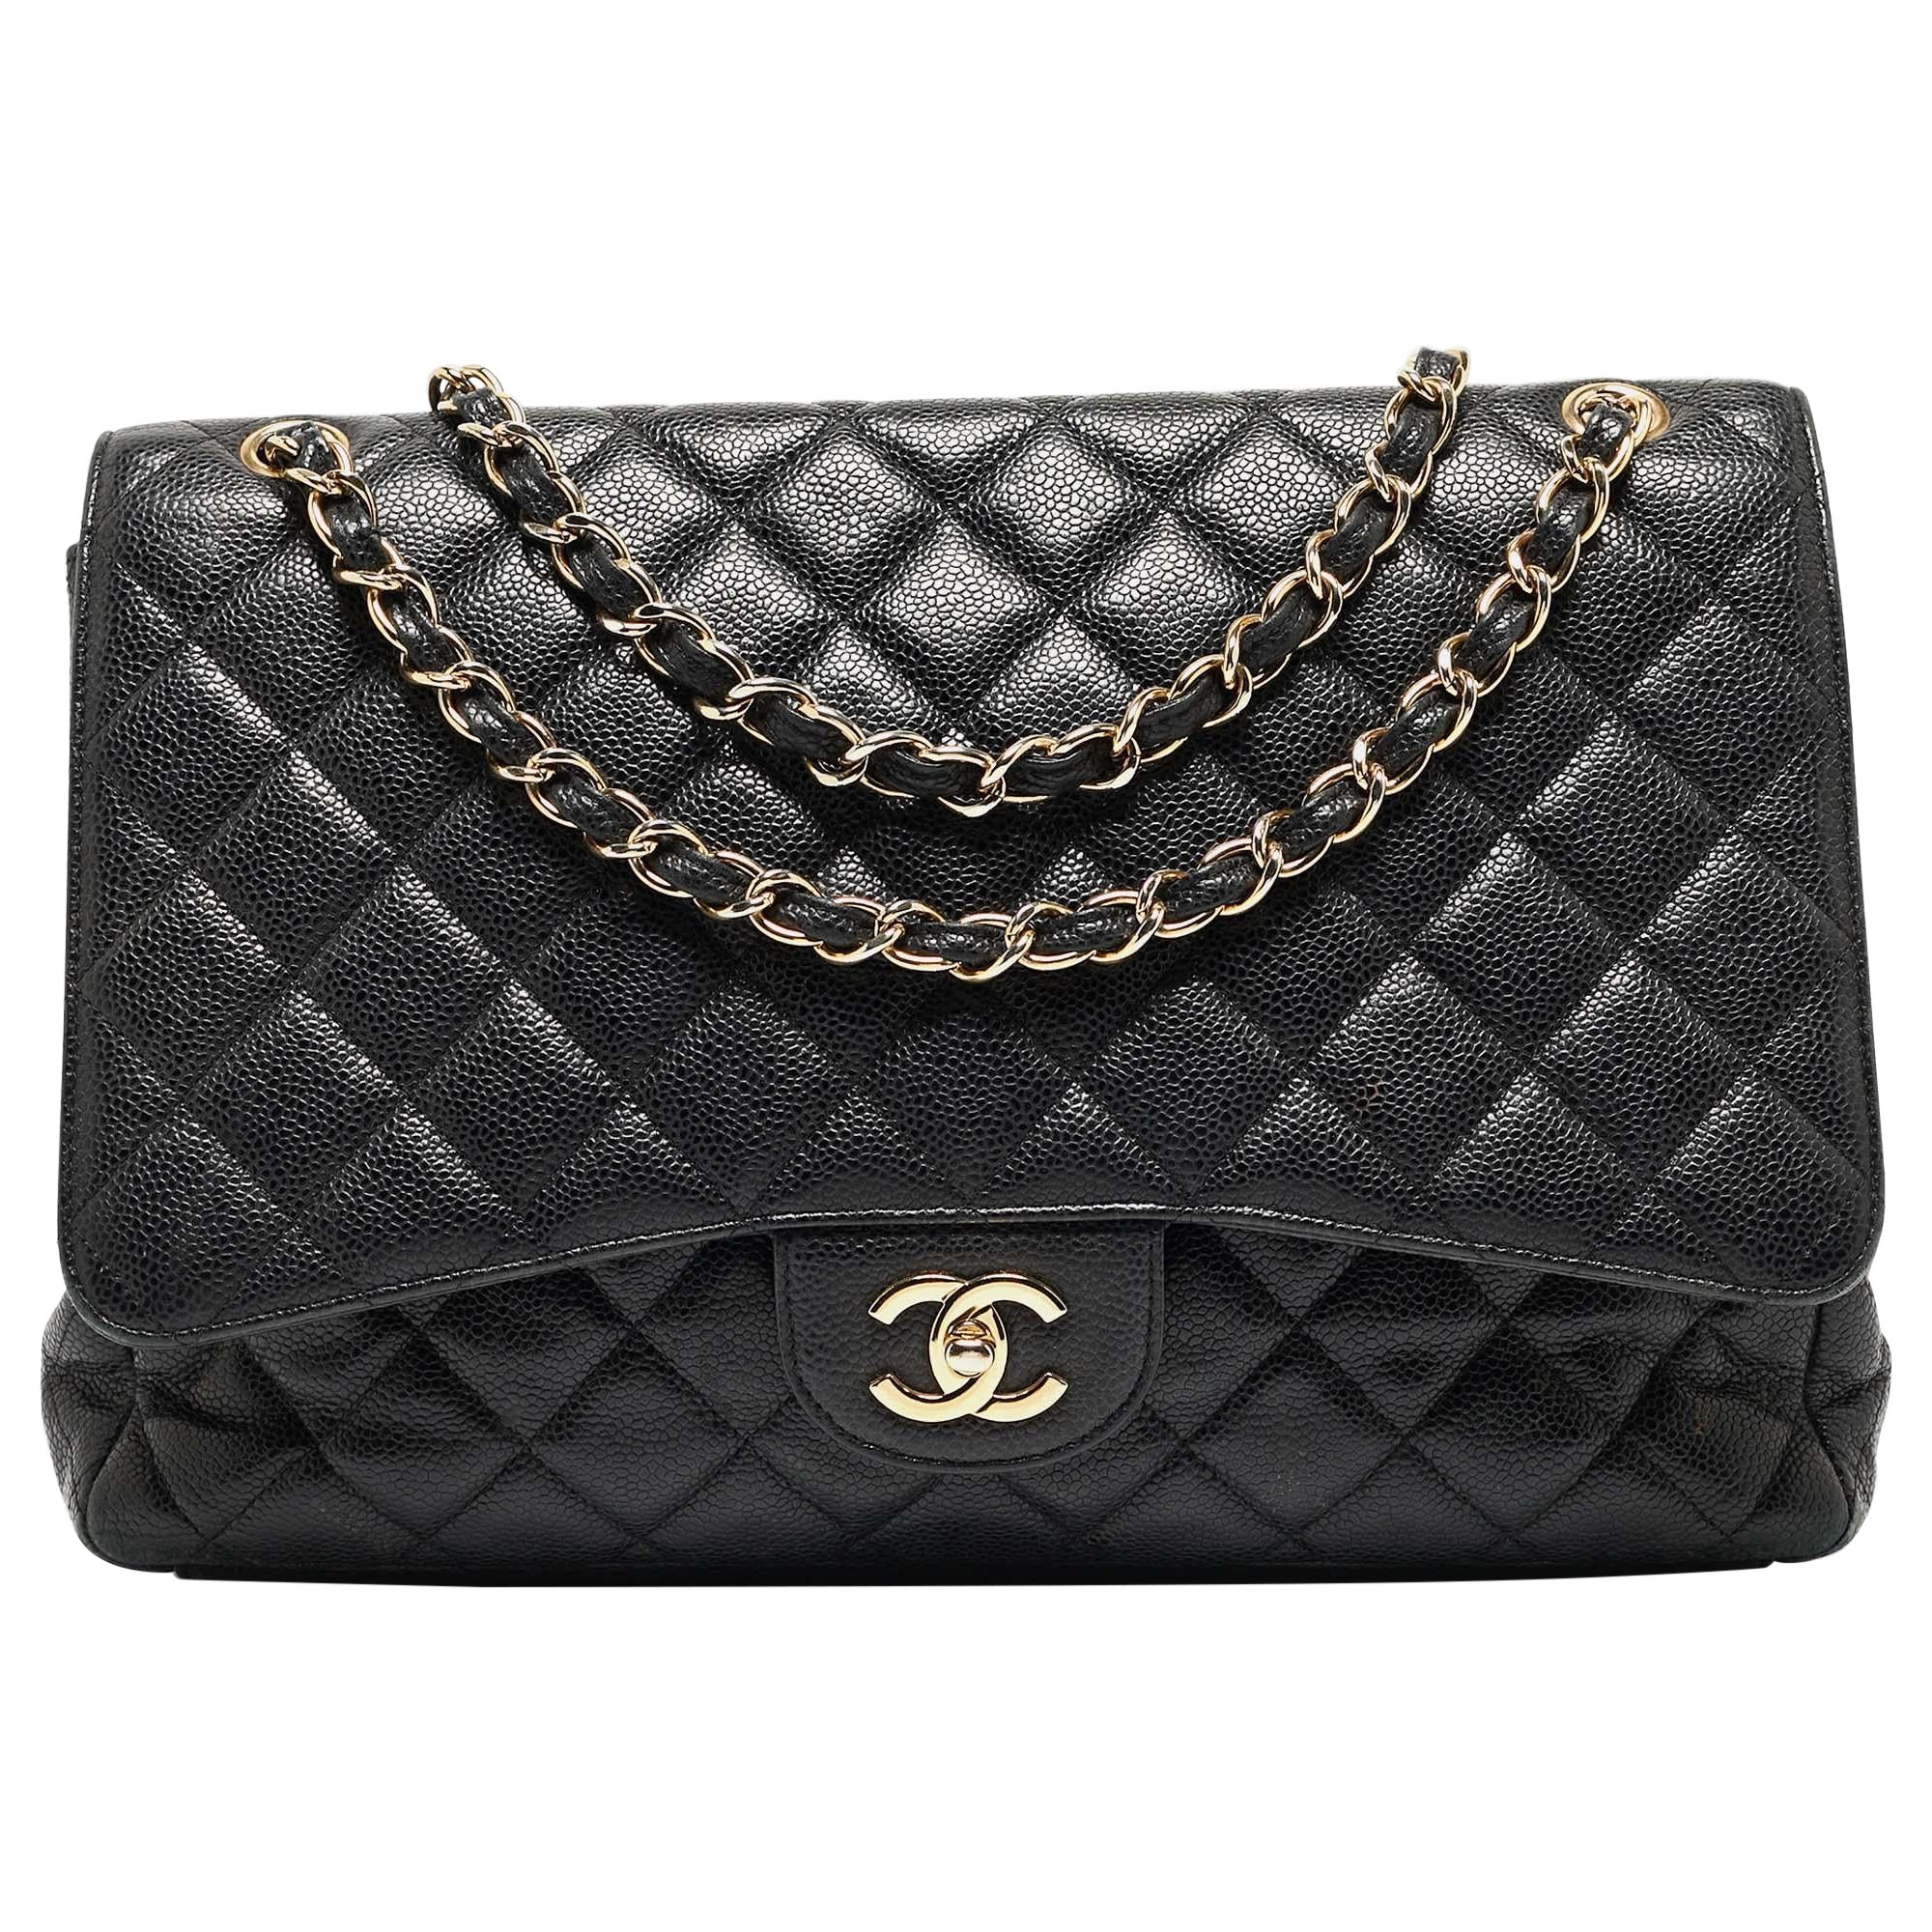 Chanel Black Quilted Caviar Leather Maxi Classic Single Flap Bag For Sale